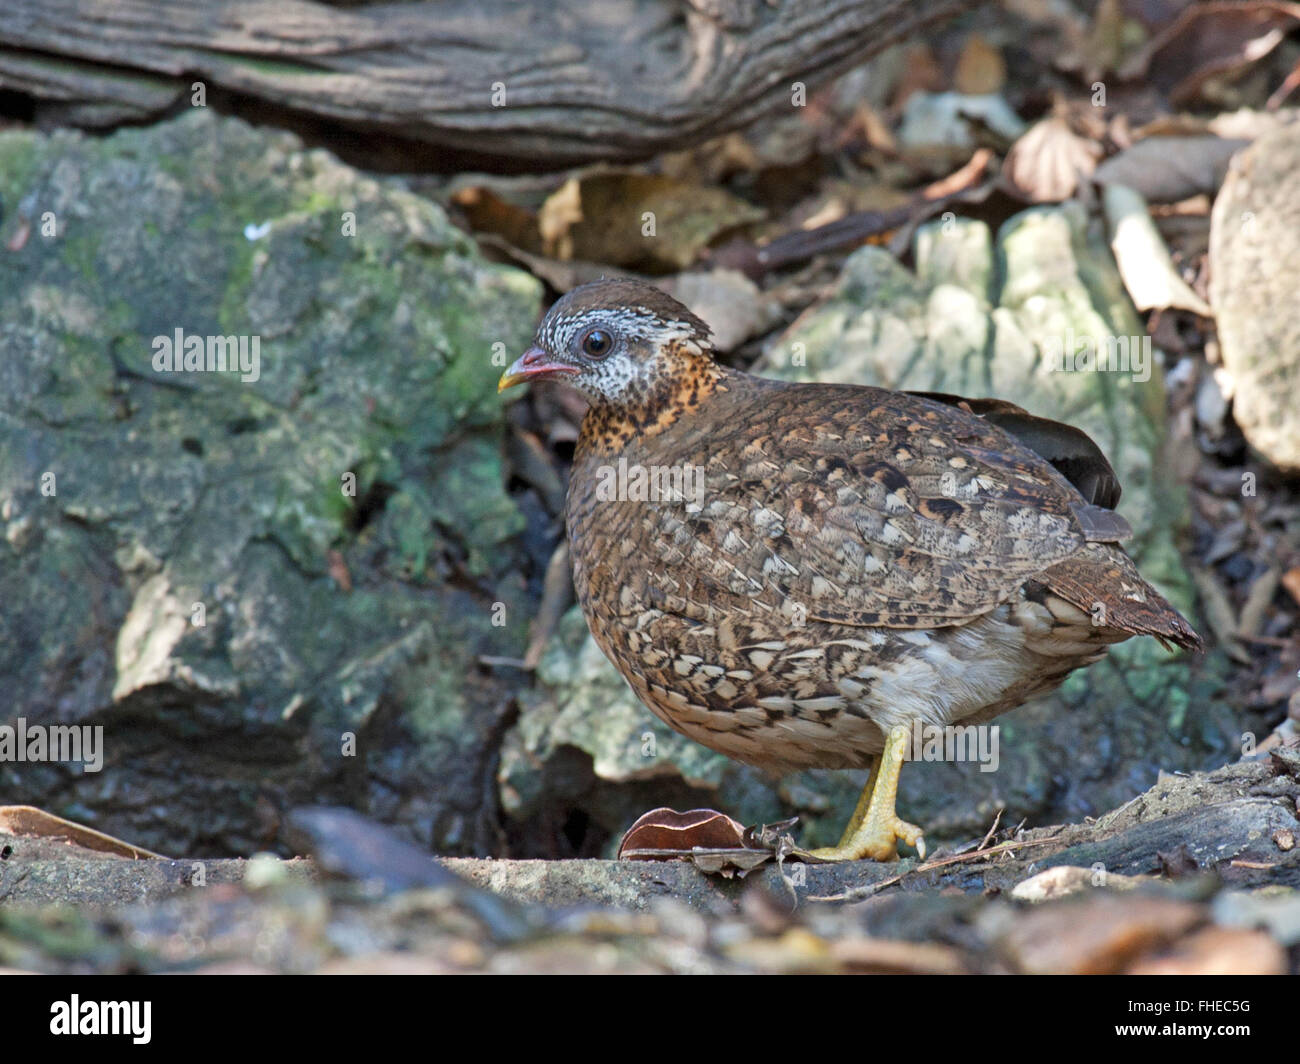 A Scaly-breasted Partridge (Arborophila chloropus) on the forest floor in Western Thailand Stock Photo